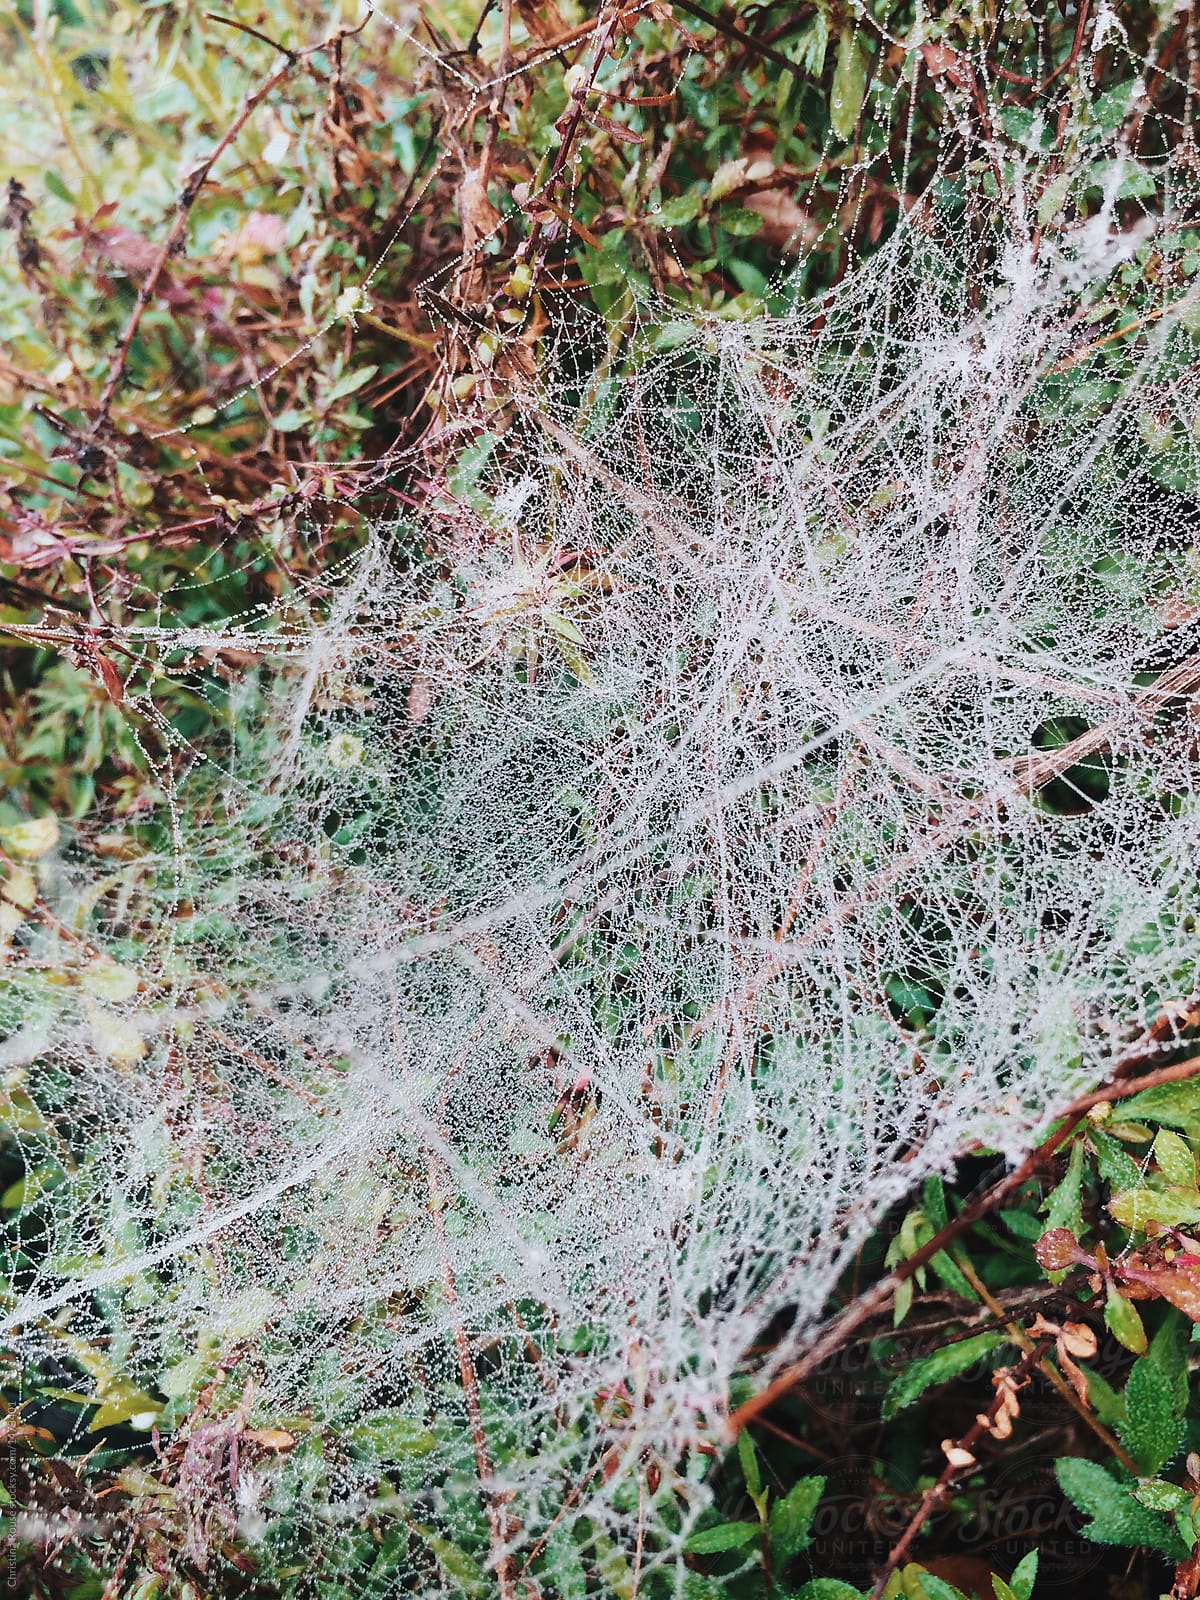 Spider Web With Morning Dew In A Green Bush In A Garden by